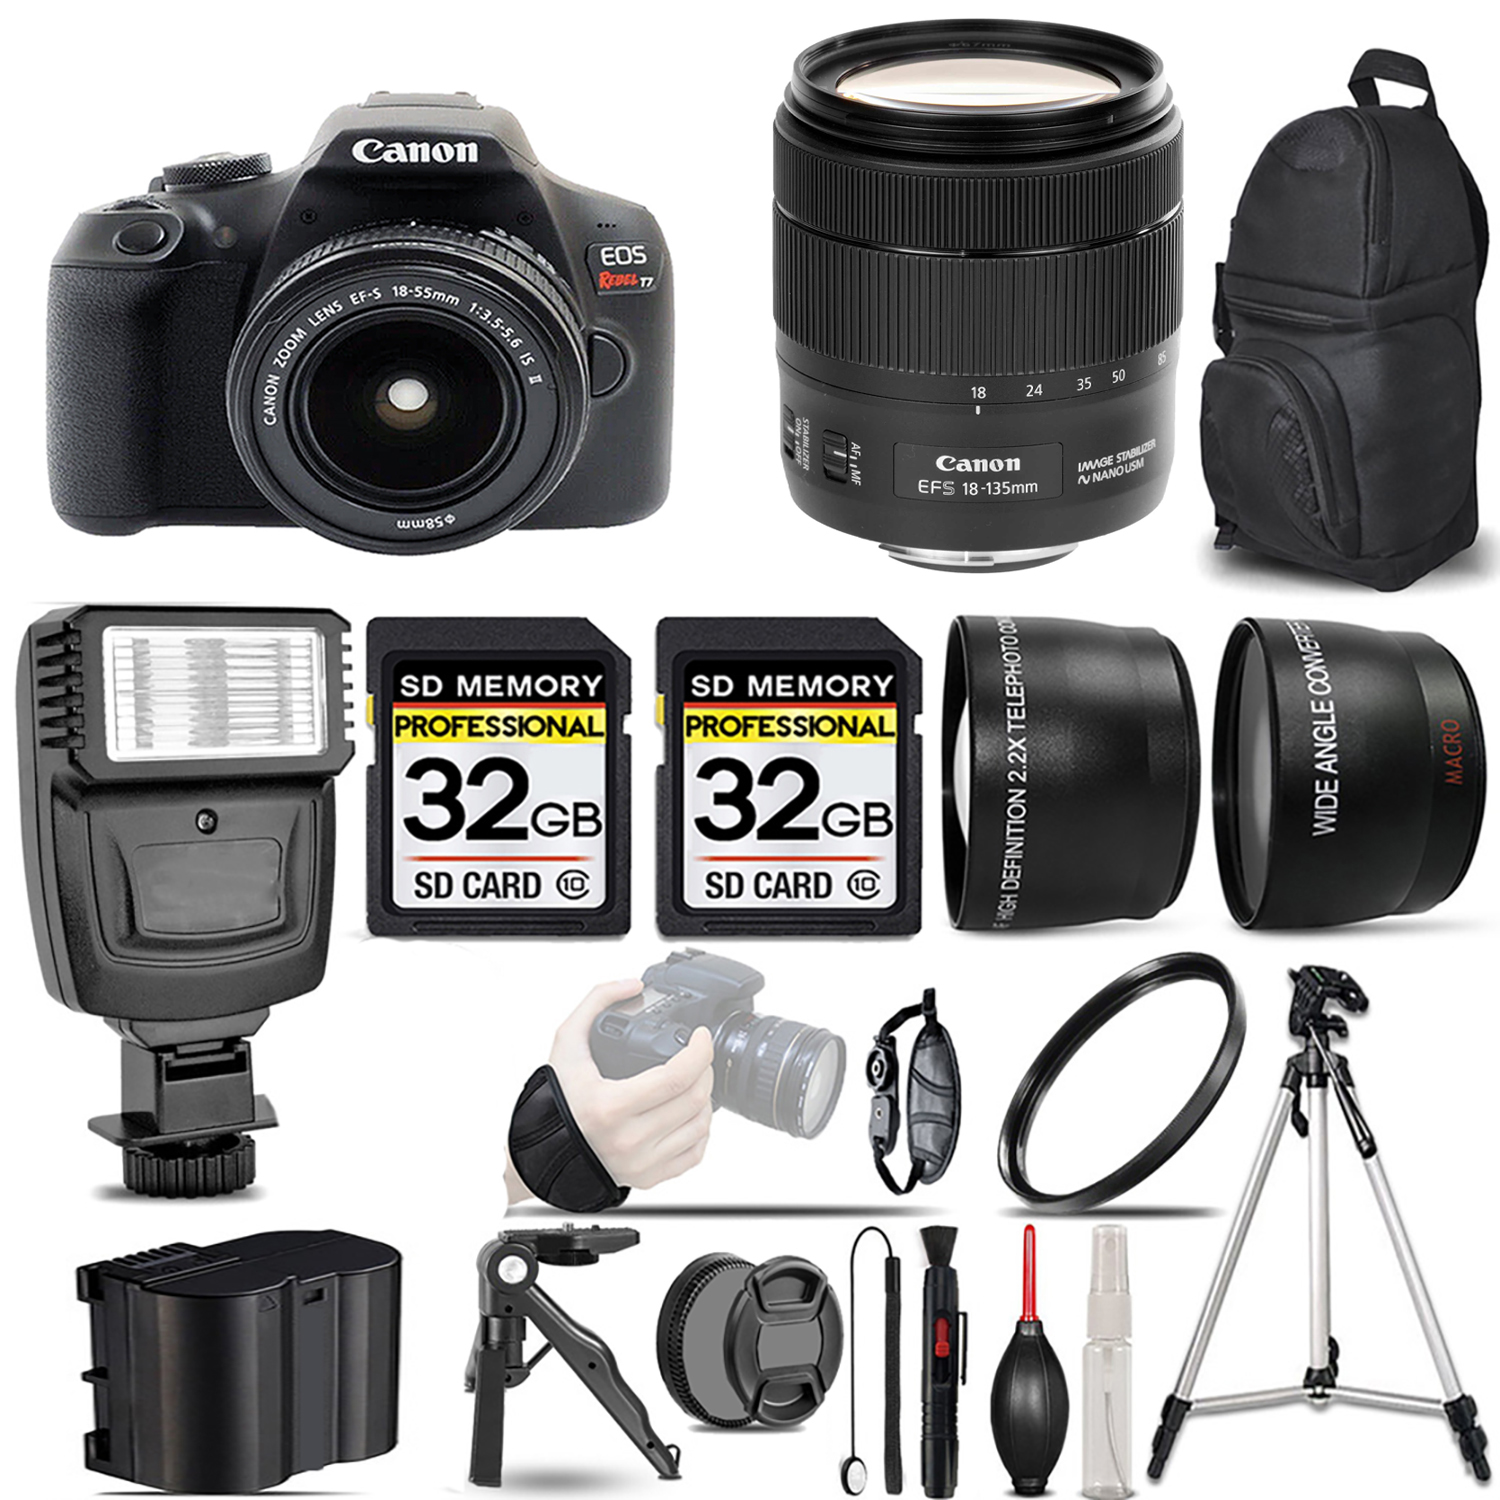 Rebel T7 with 18-55mm Lens + 18-135mm f/3.5-5.6 IS USM Lens + Flash + 64GB *FREE SHIPPING*